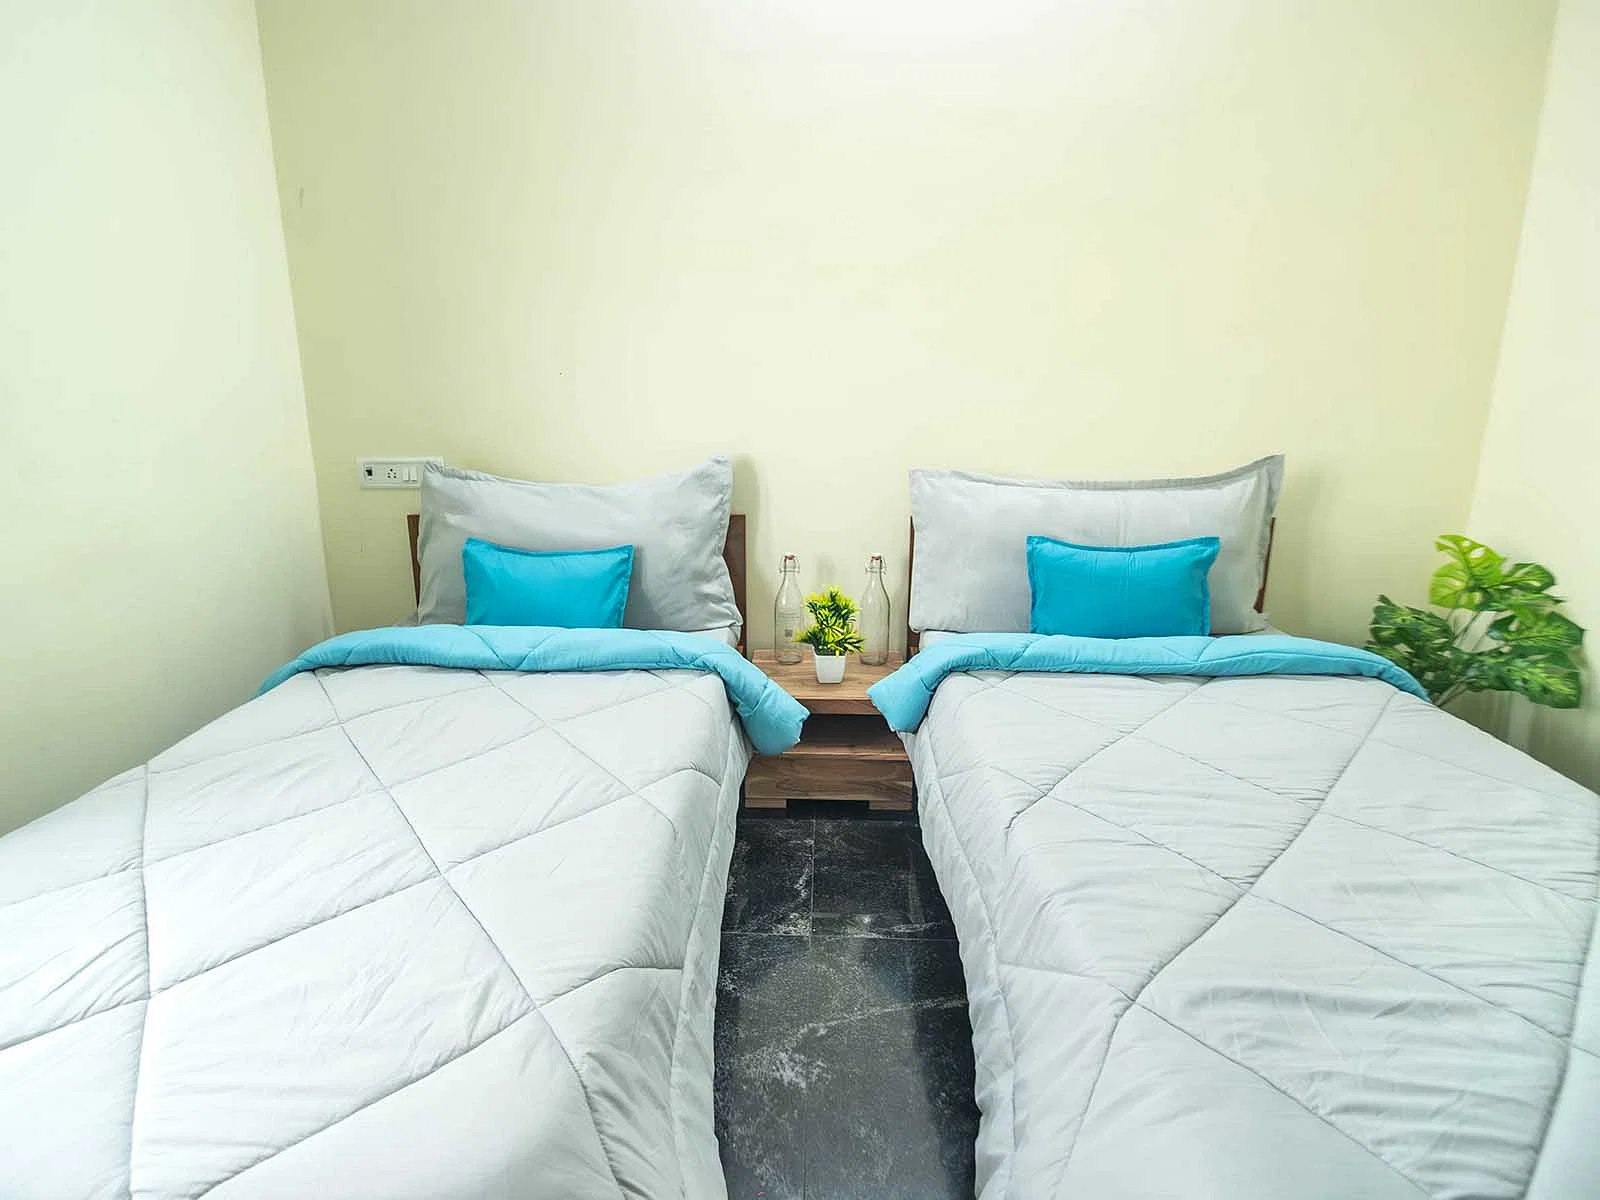 pgs in Adyar with Daily housekeeping facilities and free Wi-Fi-Zolo Logos